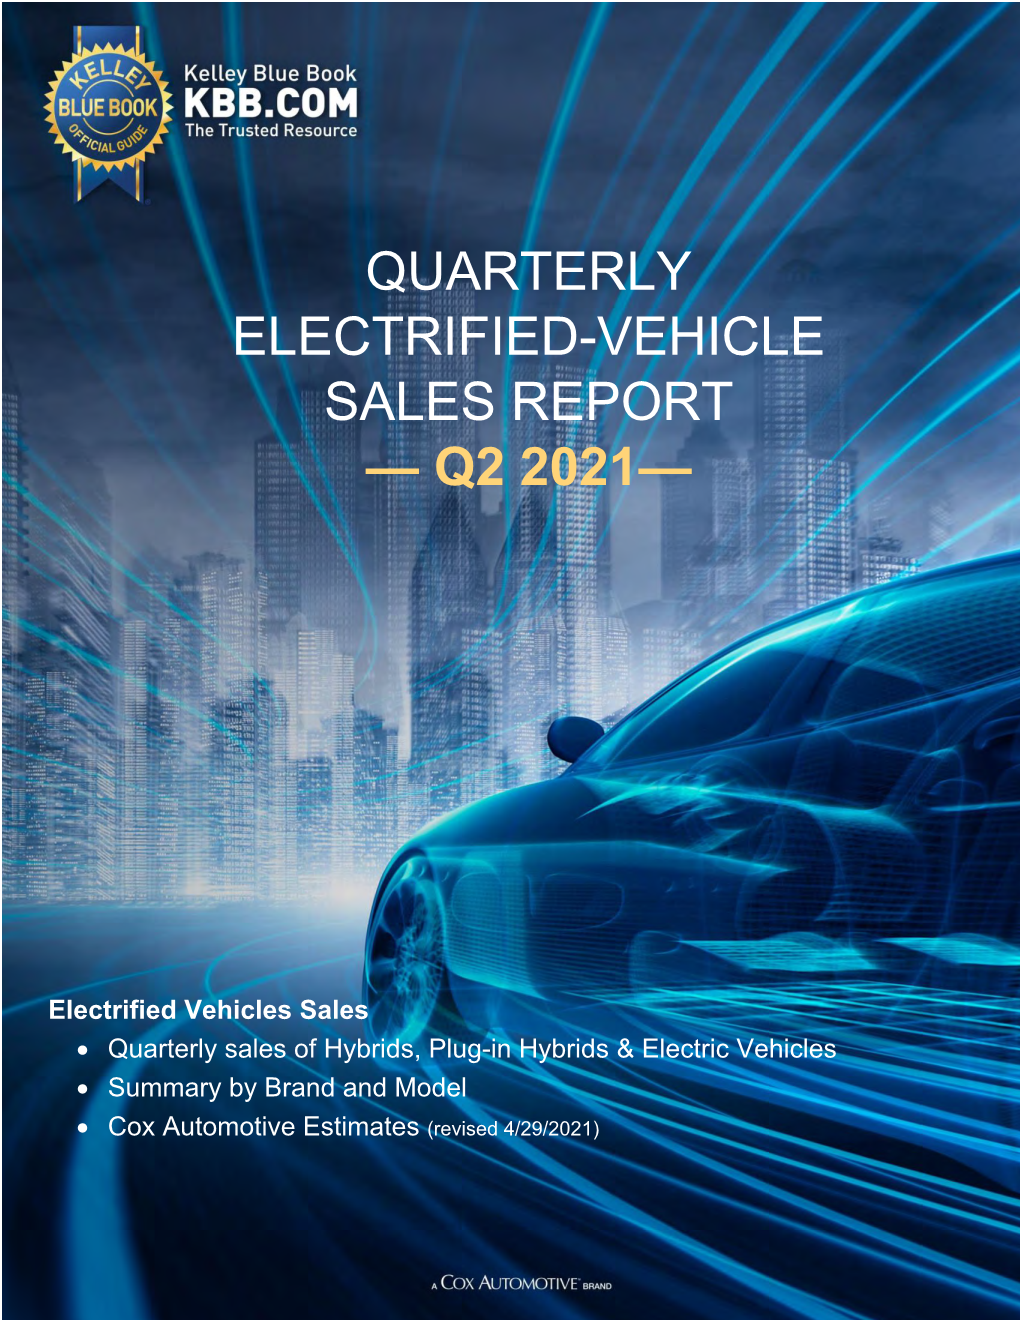 Download the Q2 Electrified-Vehicle Sales Report